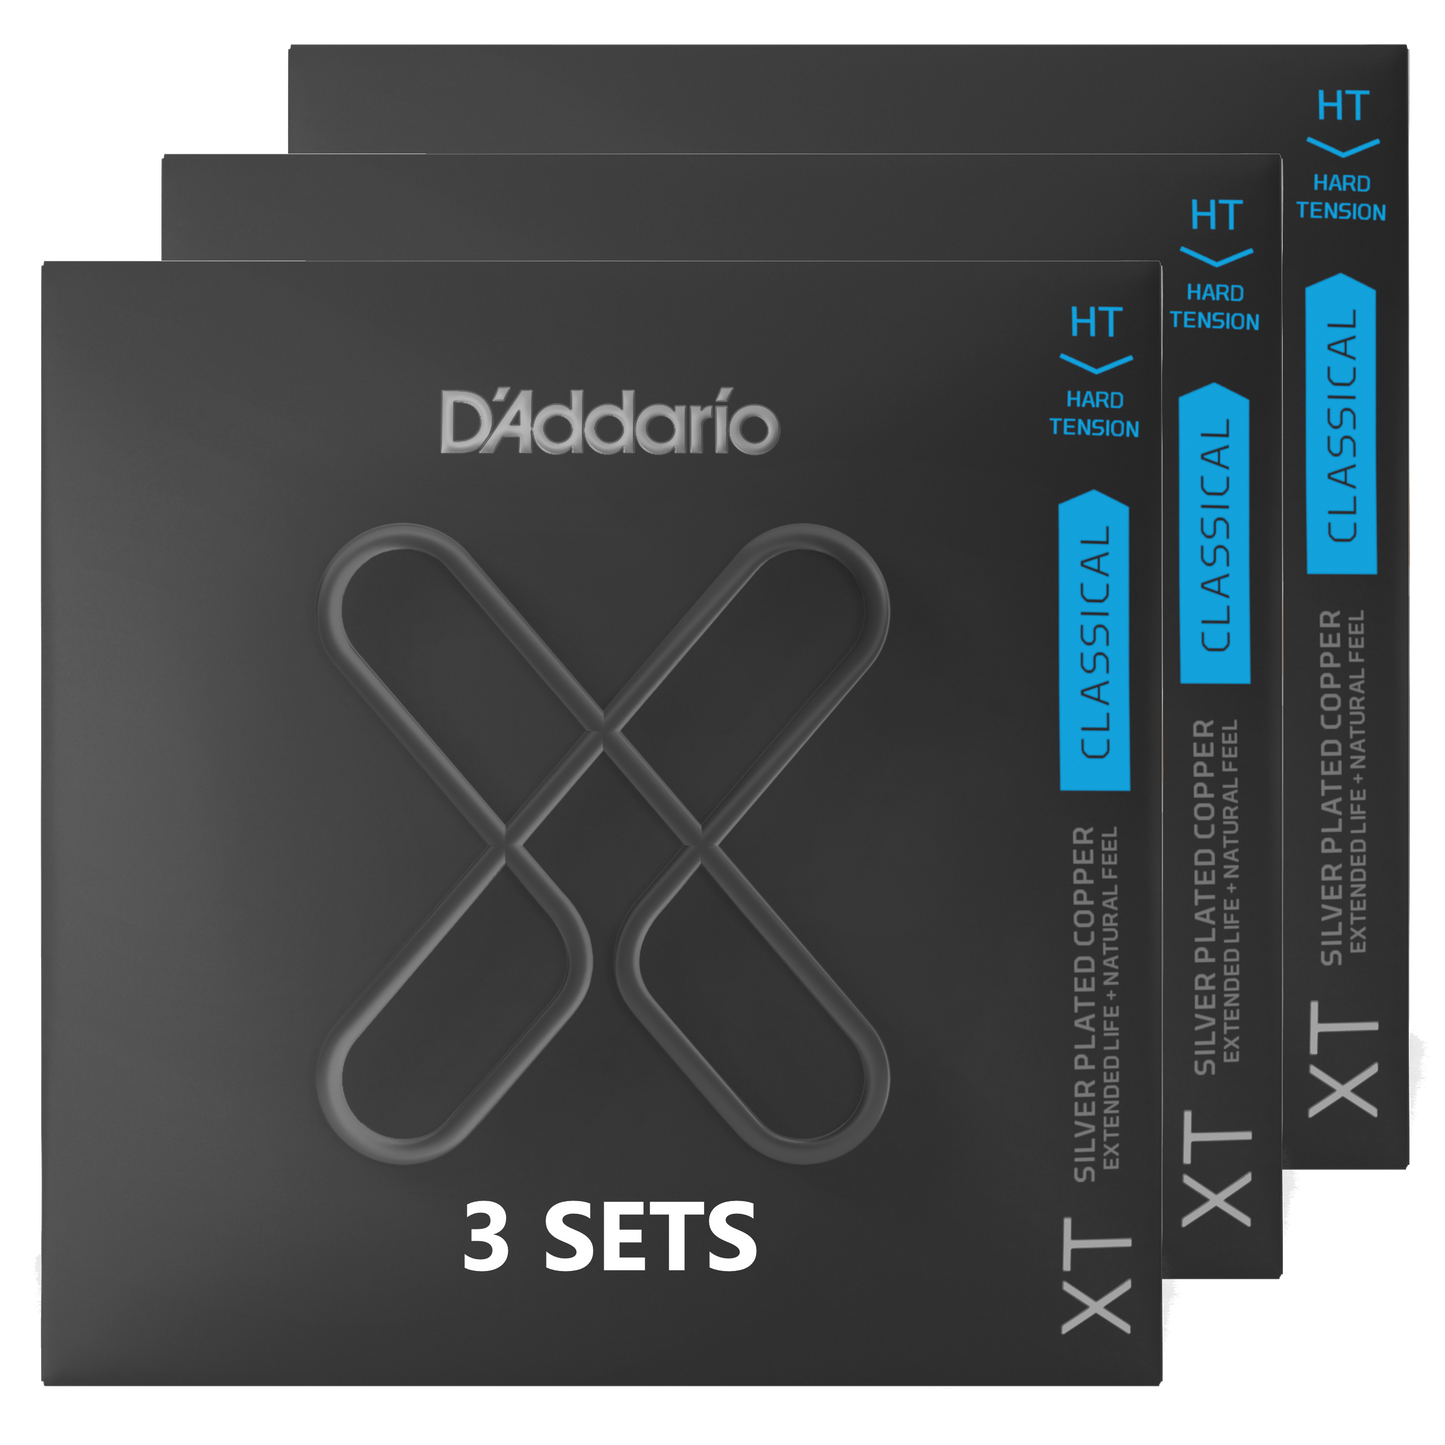 D'Addario XTC46-3P, XT Classical Silver Plated Copper, Hard Tension (3 SETS)